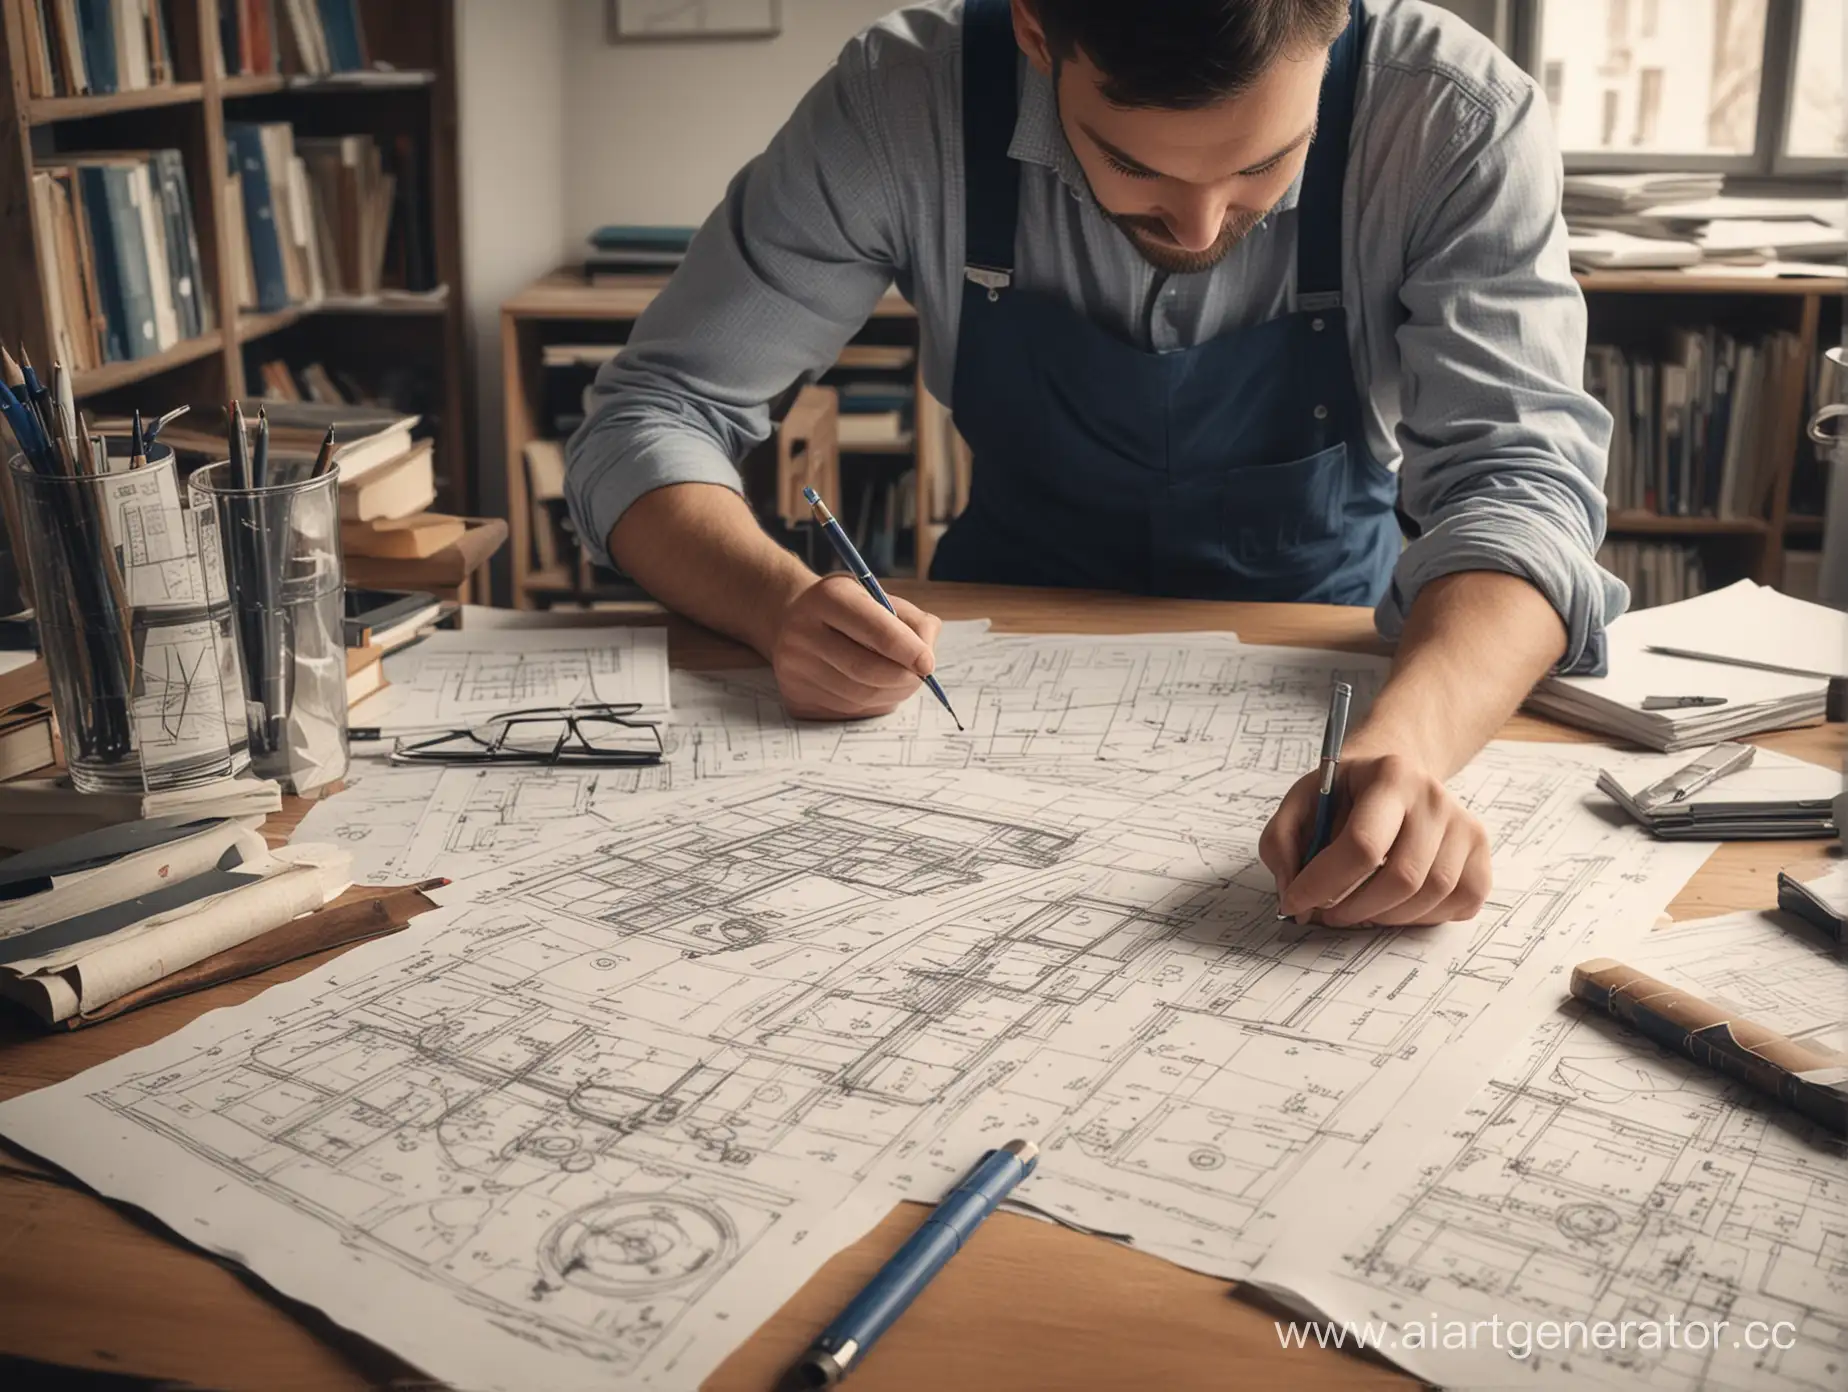 Architect-Crafting-Blueprint-at-Cluttered-Desk-with-Extensive-Drawings-and-Books